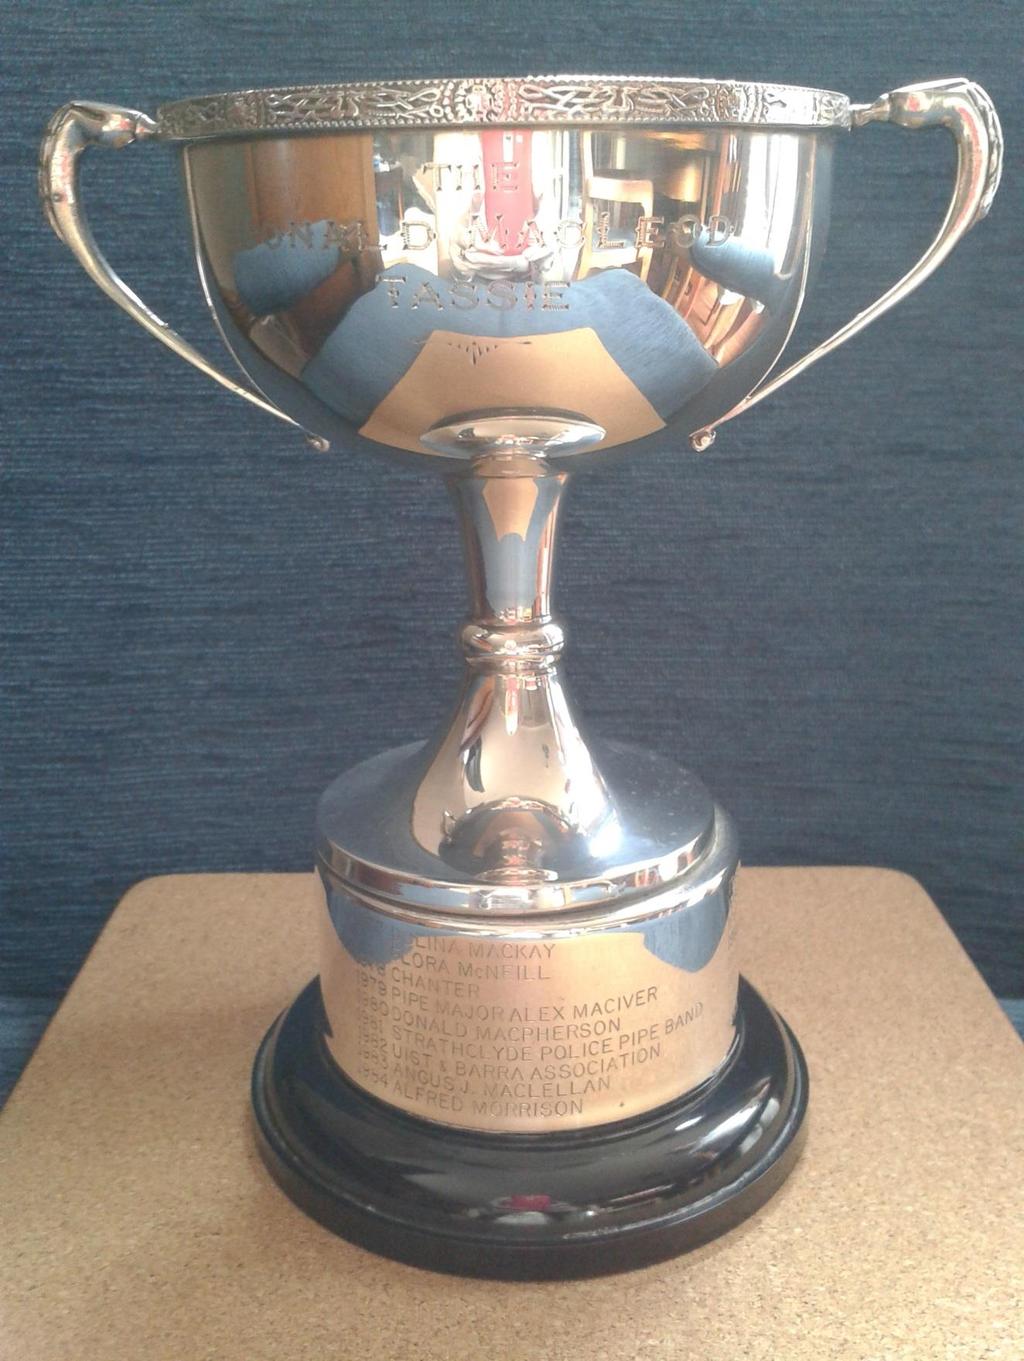 The Donald MacLeod Tassie This trophy was donated to The Scottish Pipers Association by Donald Macleod